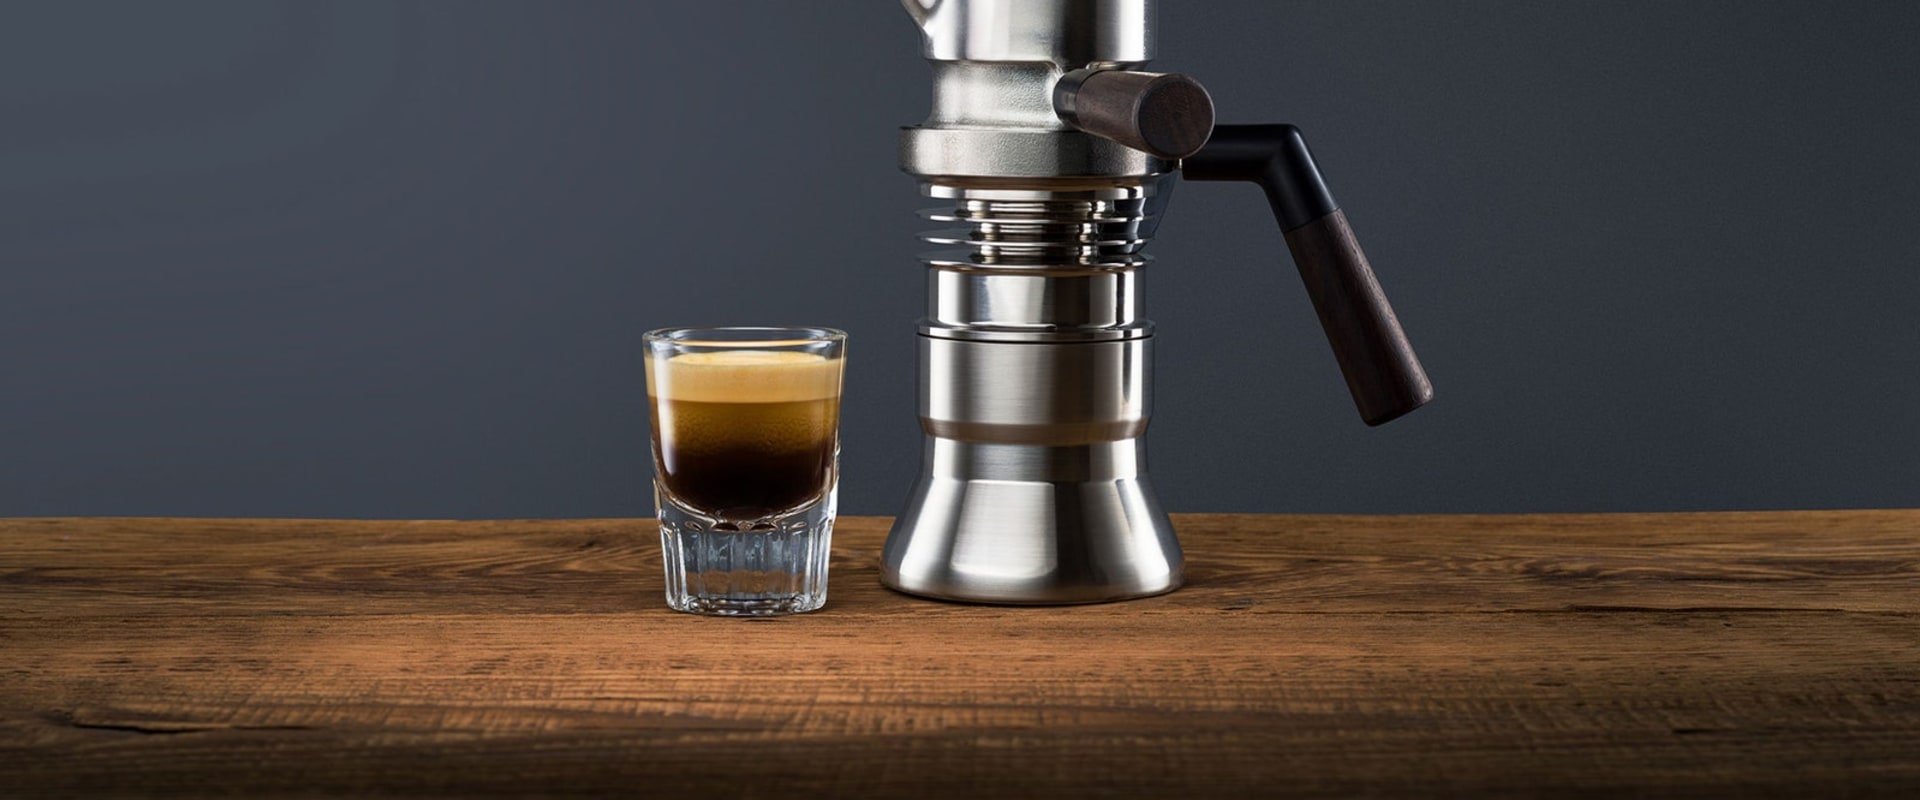 What kind of coffee is best for an espresso machine?